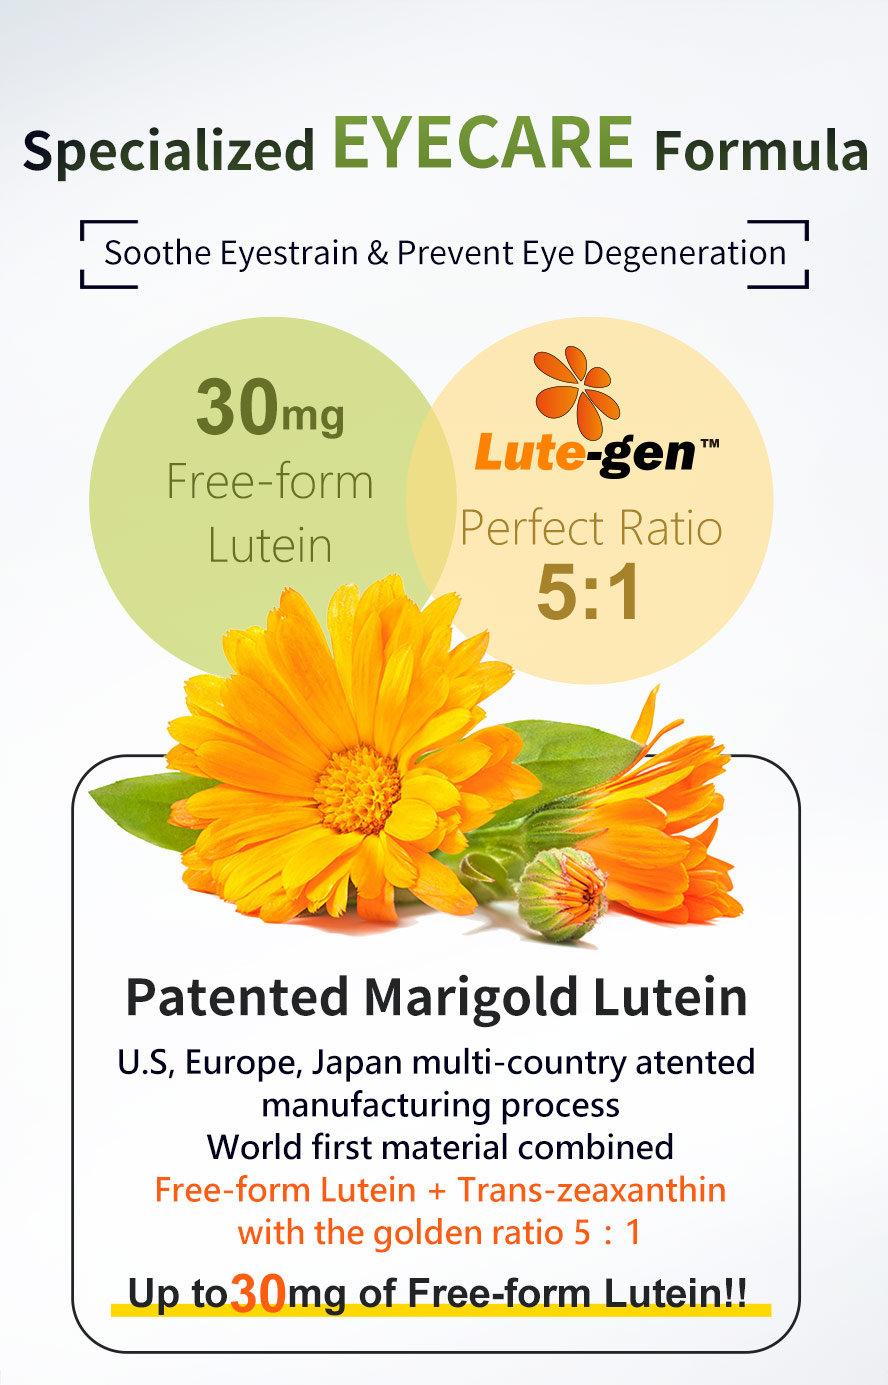 UNIQMAN Patented Gaming Lutein uses patented free-form marigold lutein to soothe eyestrain and prevent eye degenaration.